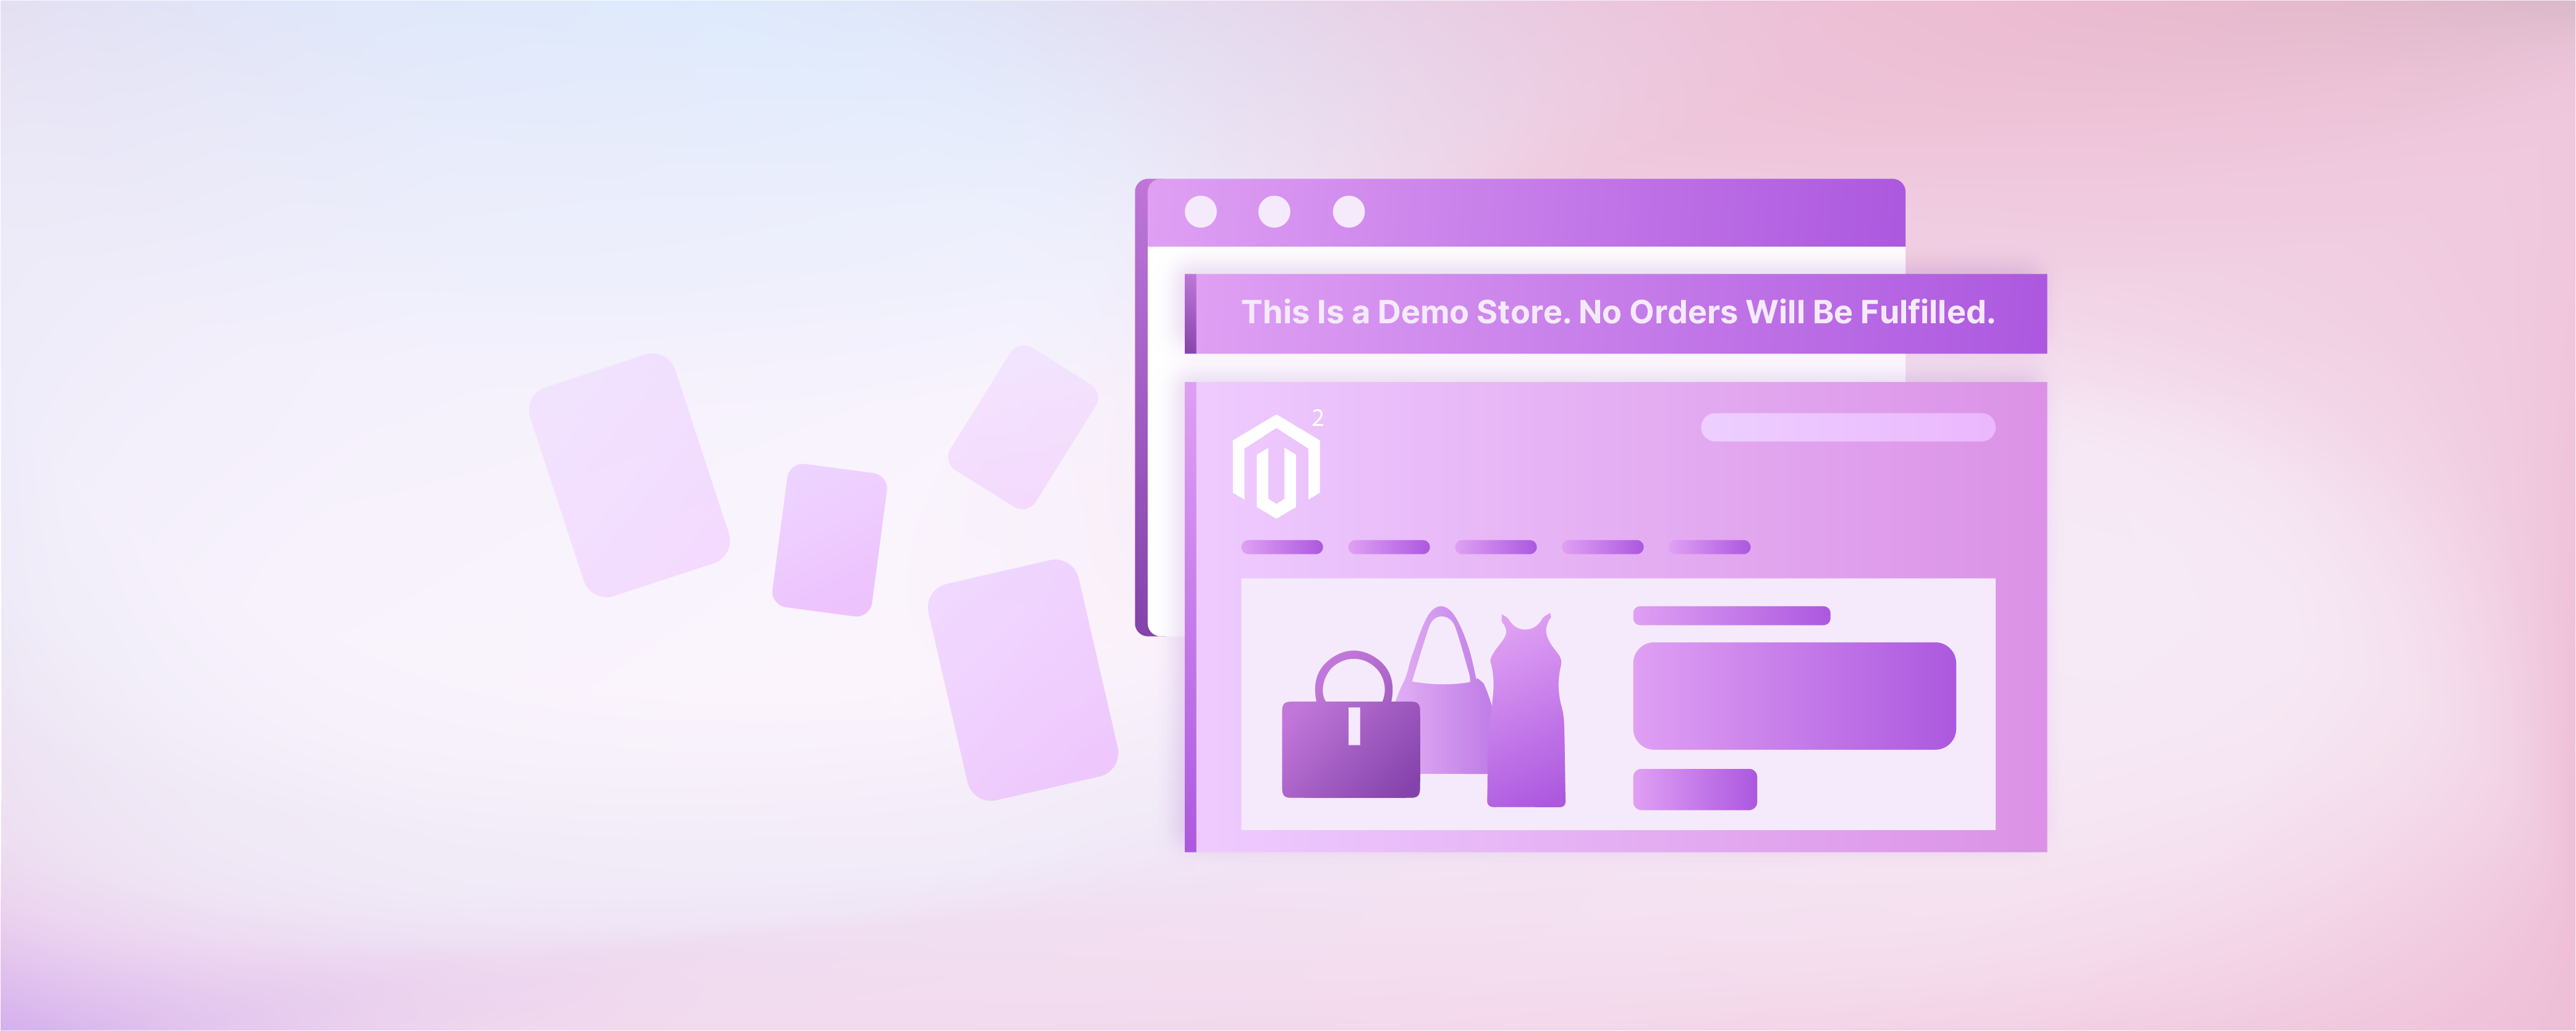 How to Enable or Disable Magento 2 Demo Store Notice